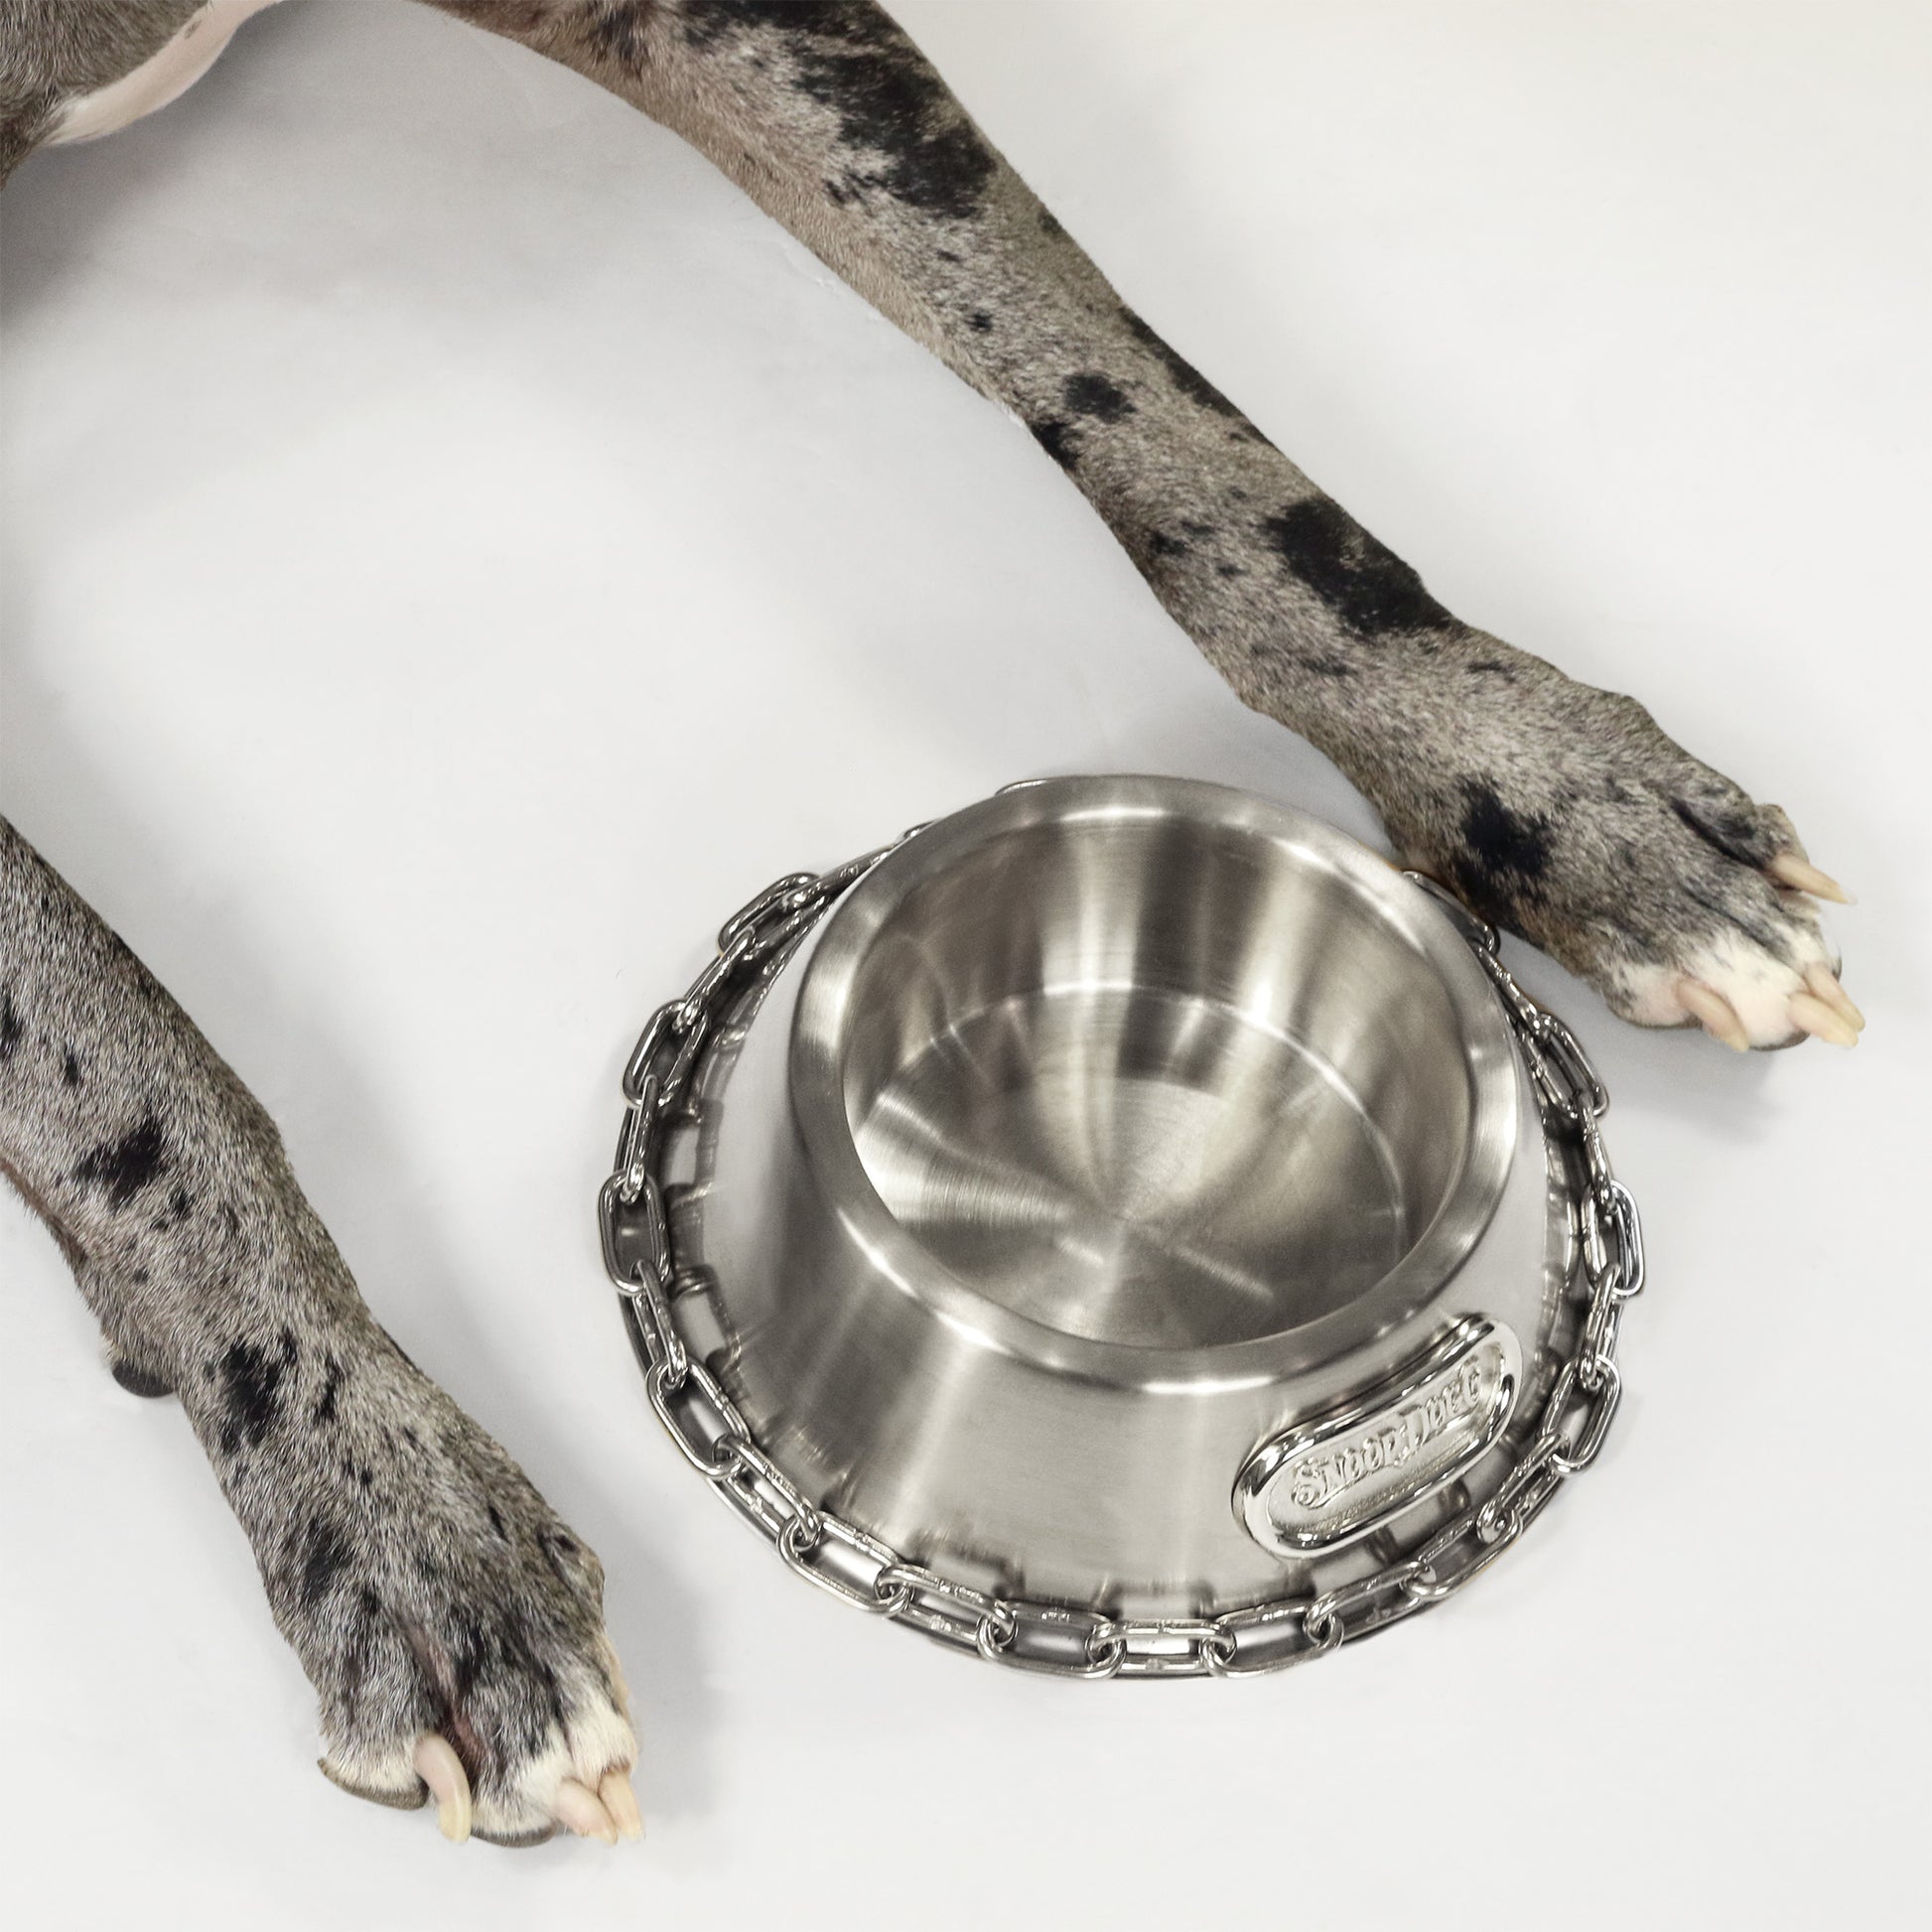 Overhead shot of the Large Deluxe Silver Pet Bowl in between the paws of Rookie the Great Dane.